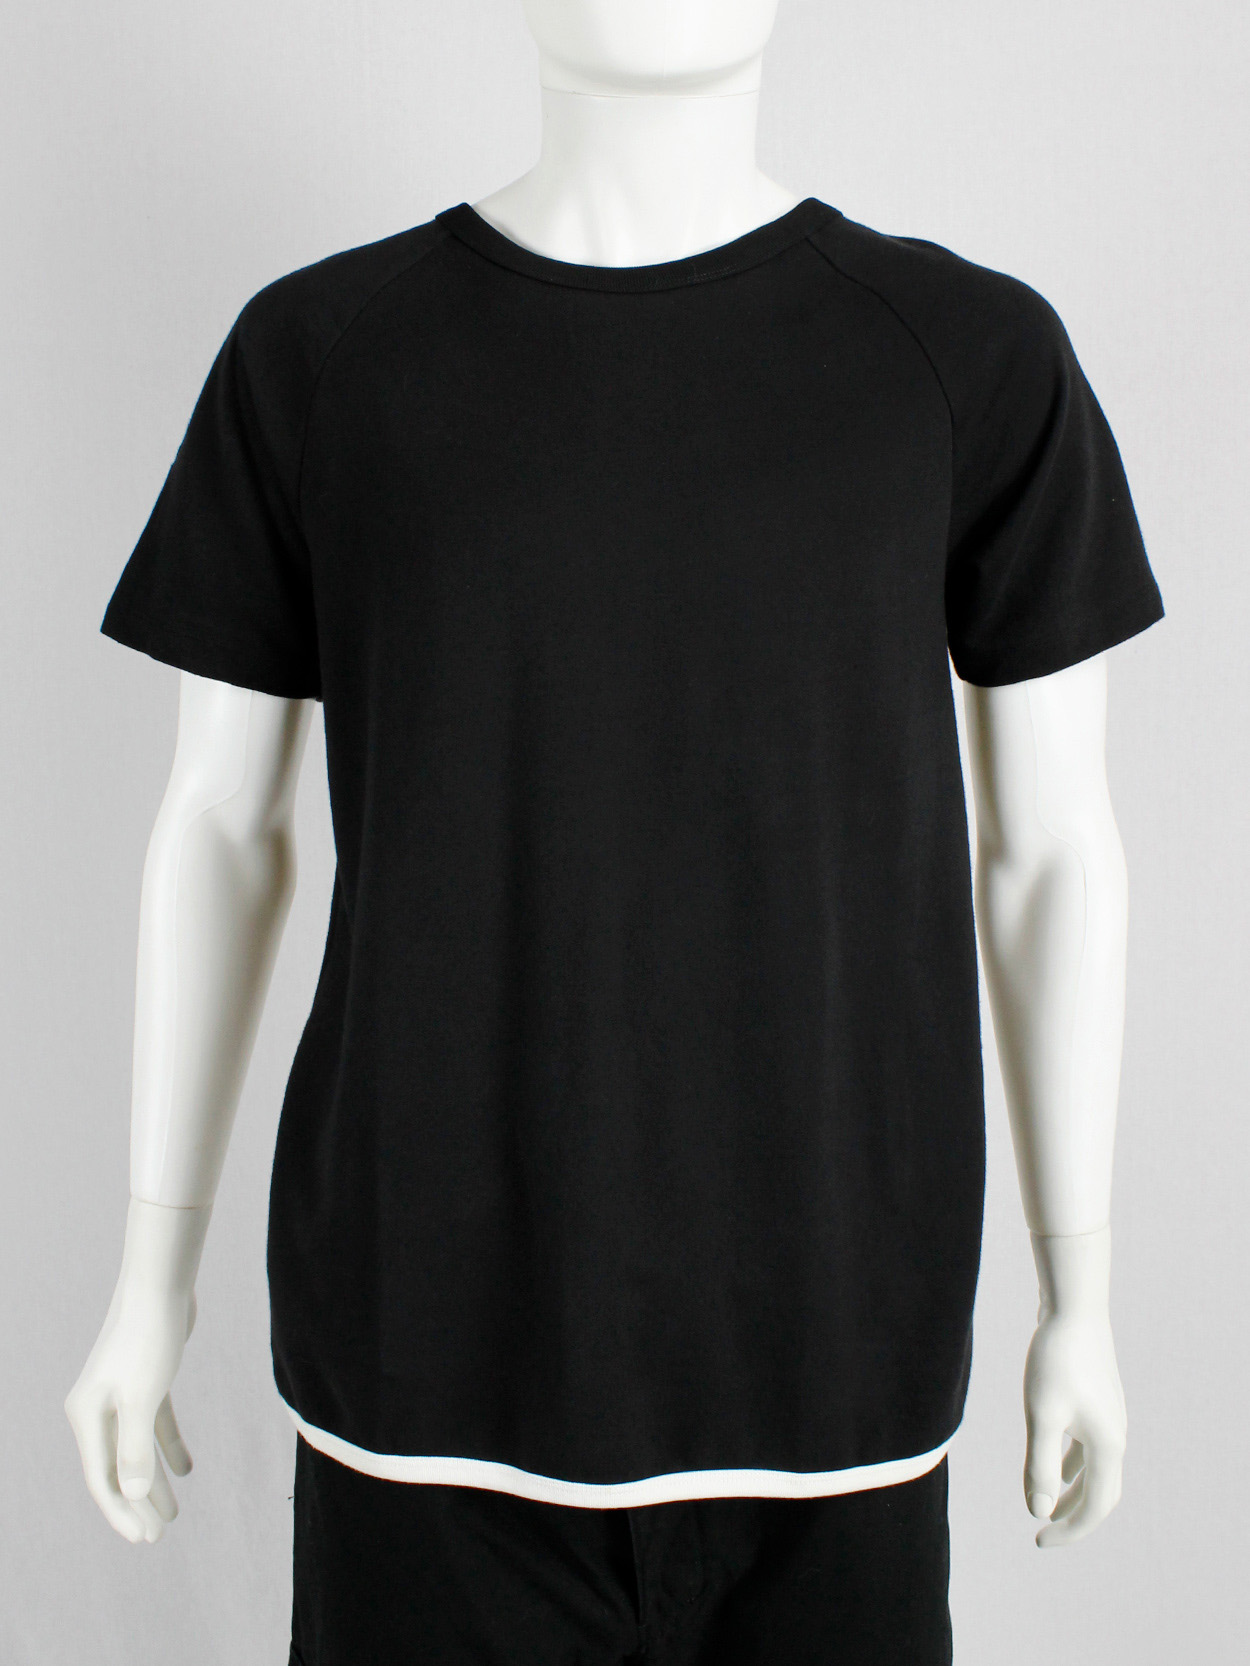 Dries Van Noten black t-shirt with white trim and open belted back - V ...